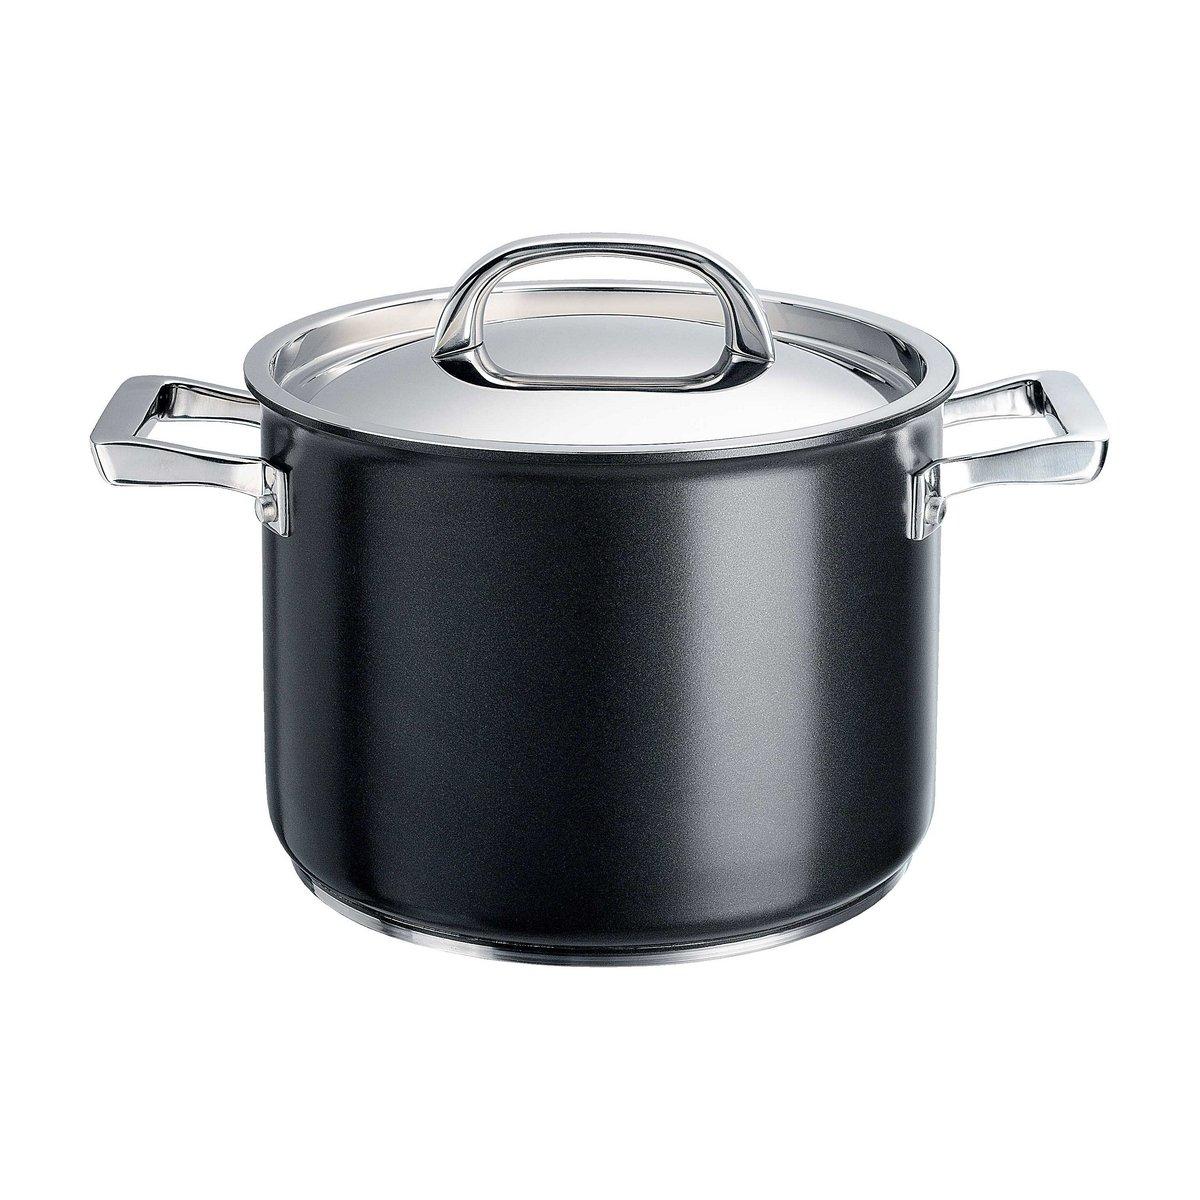 Stockpot with Durable Lid Dishwasher Safe Cookware - 24 cm / 7.6 L